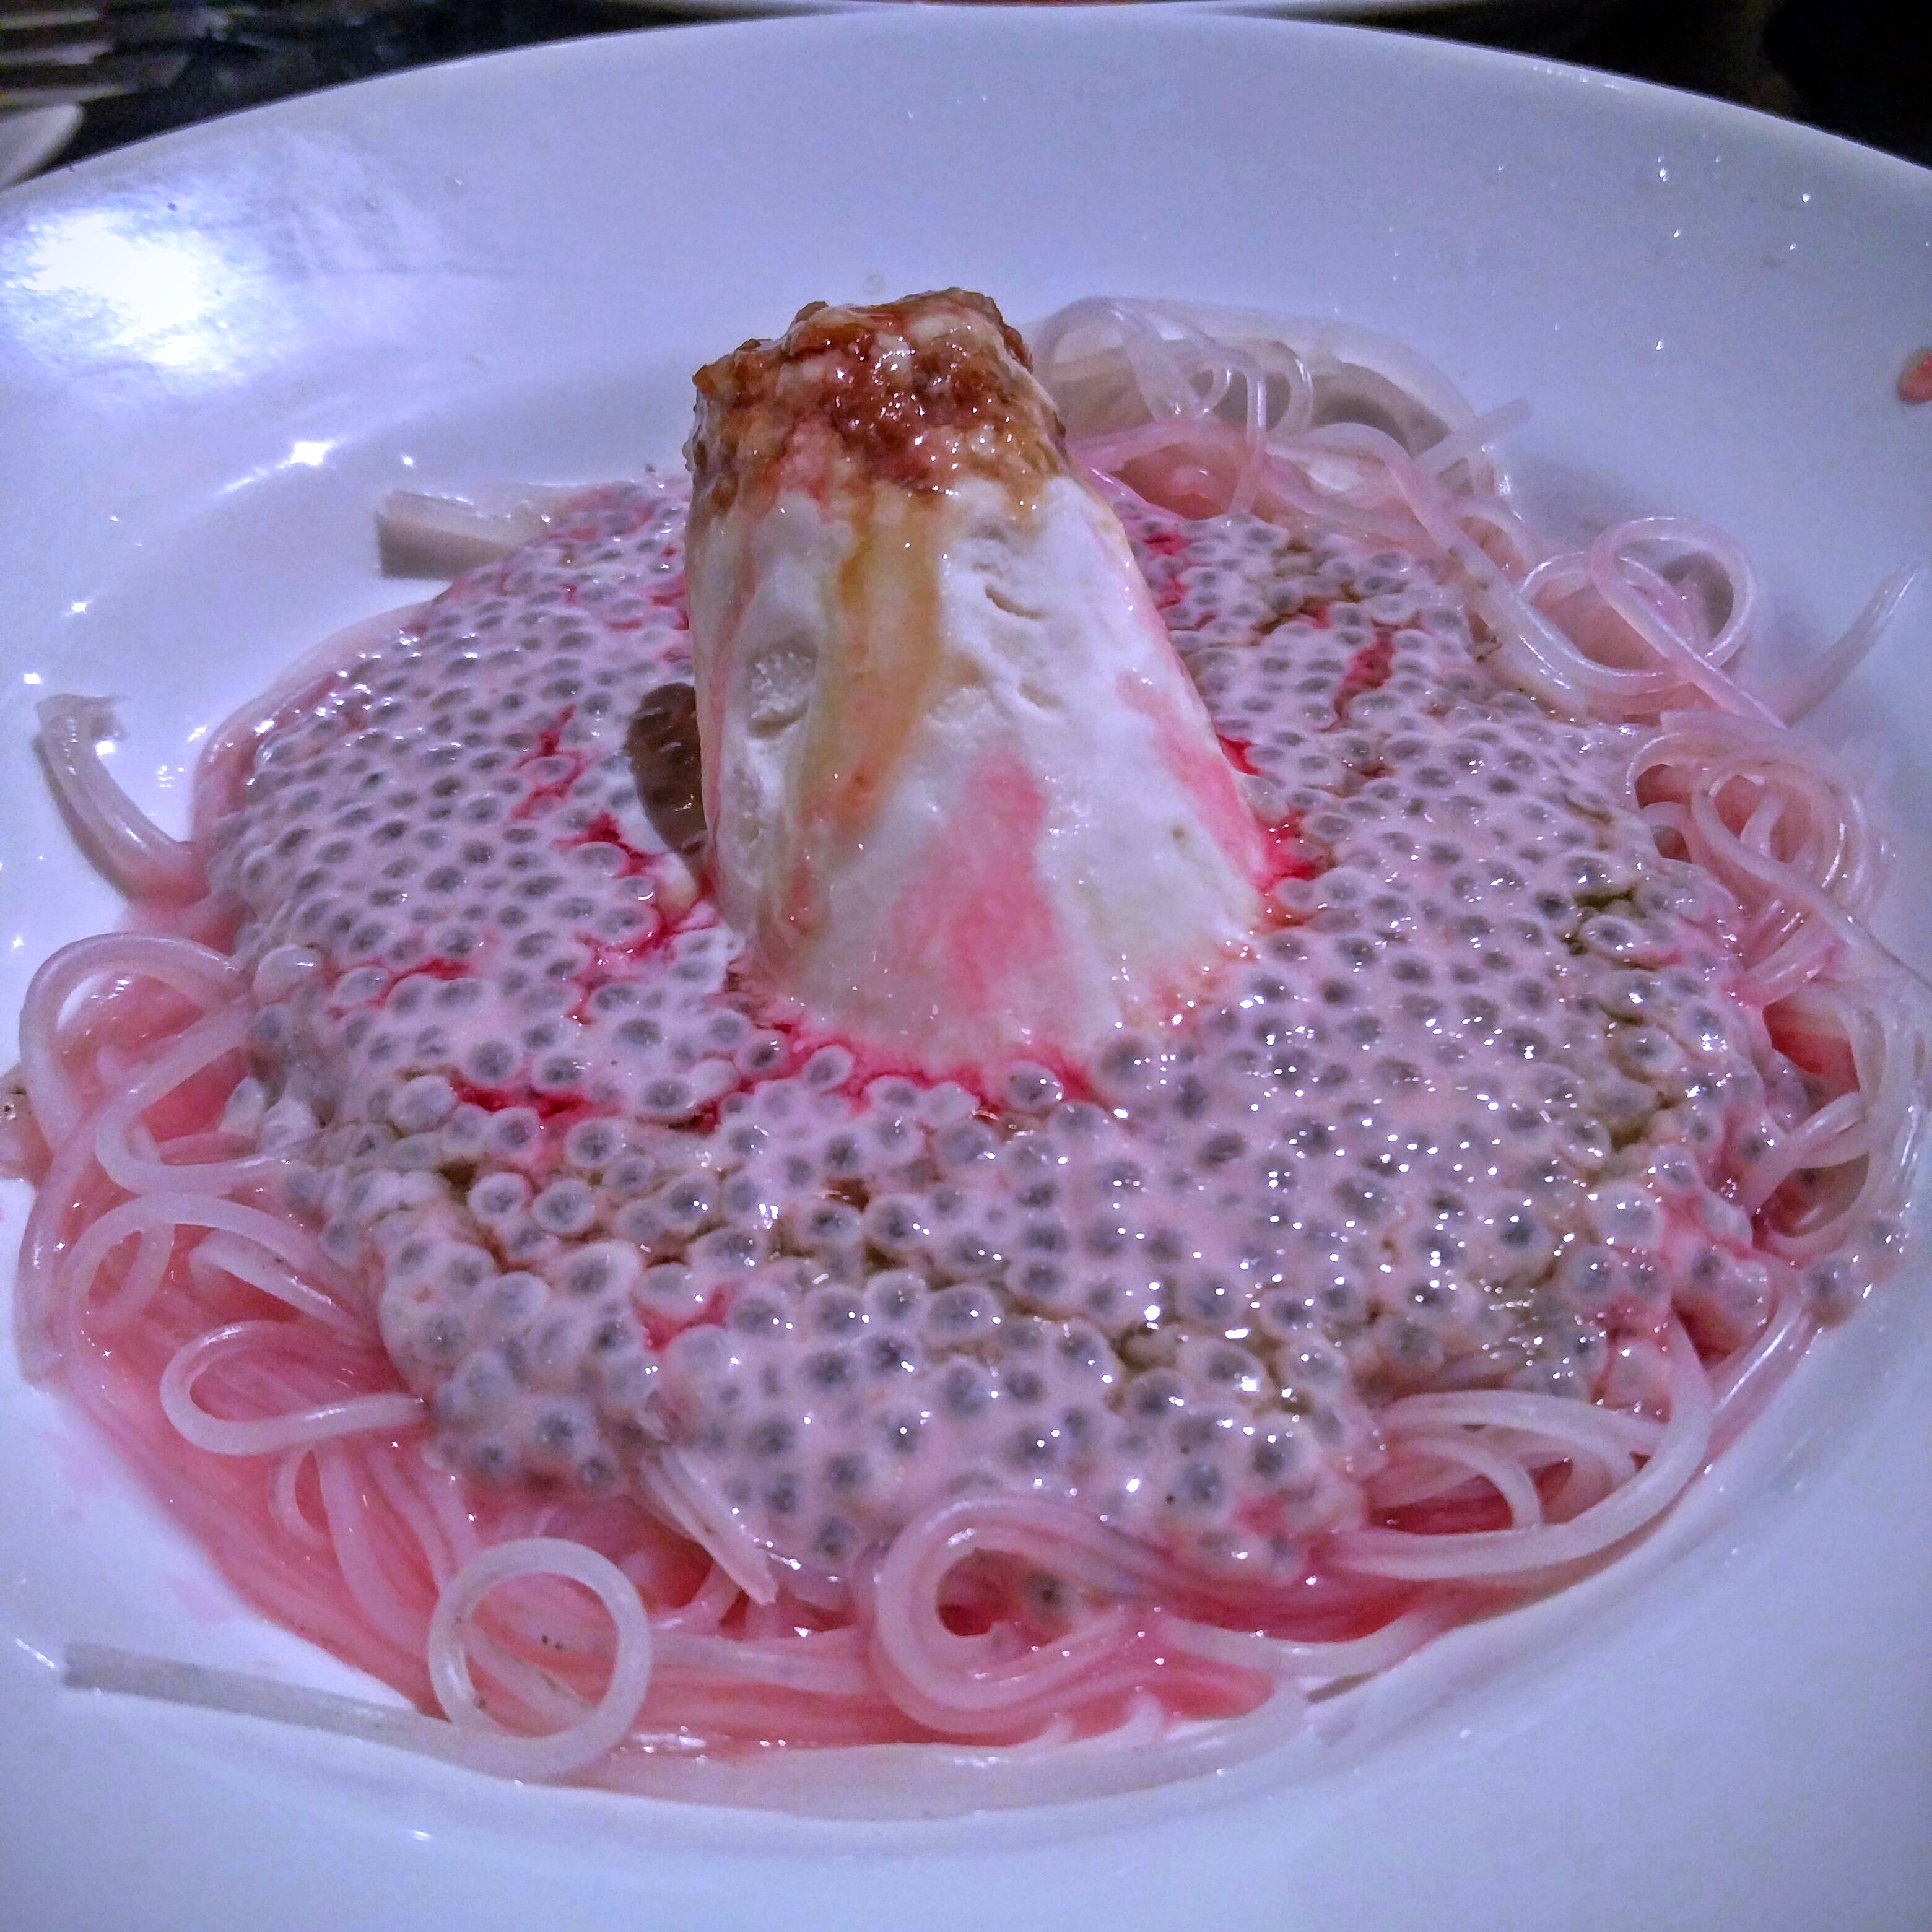 Twisted falooda: Falooda served in a bowl. As the chef puts it, this is 